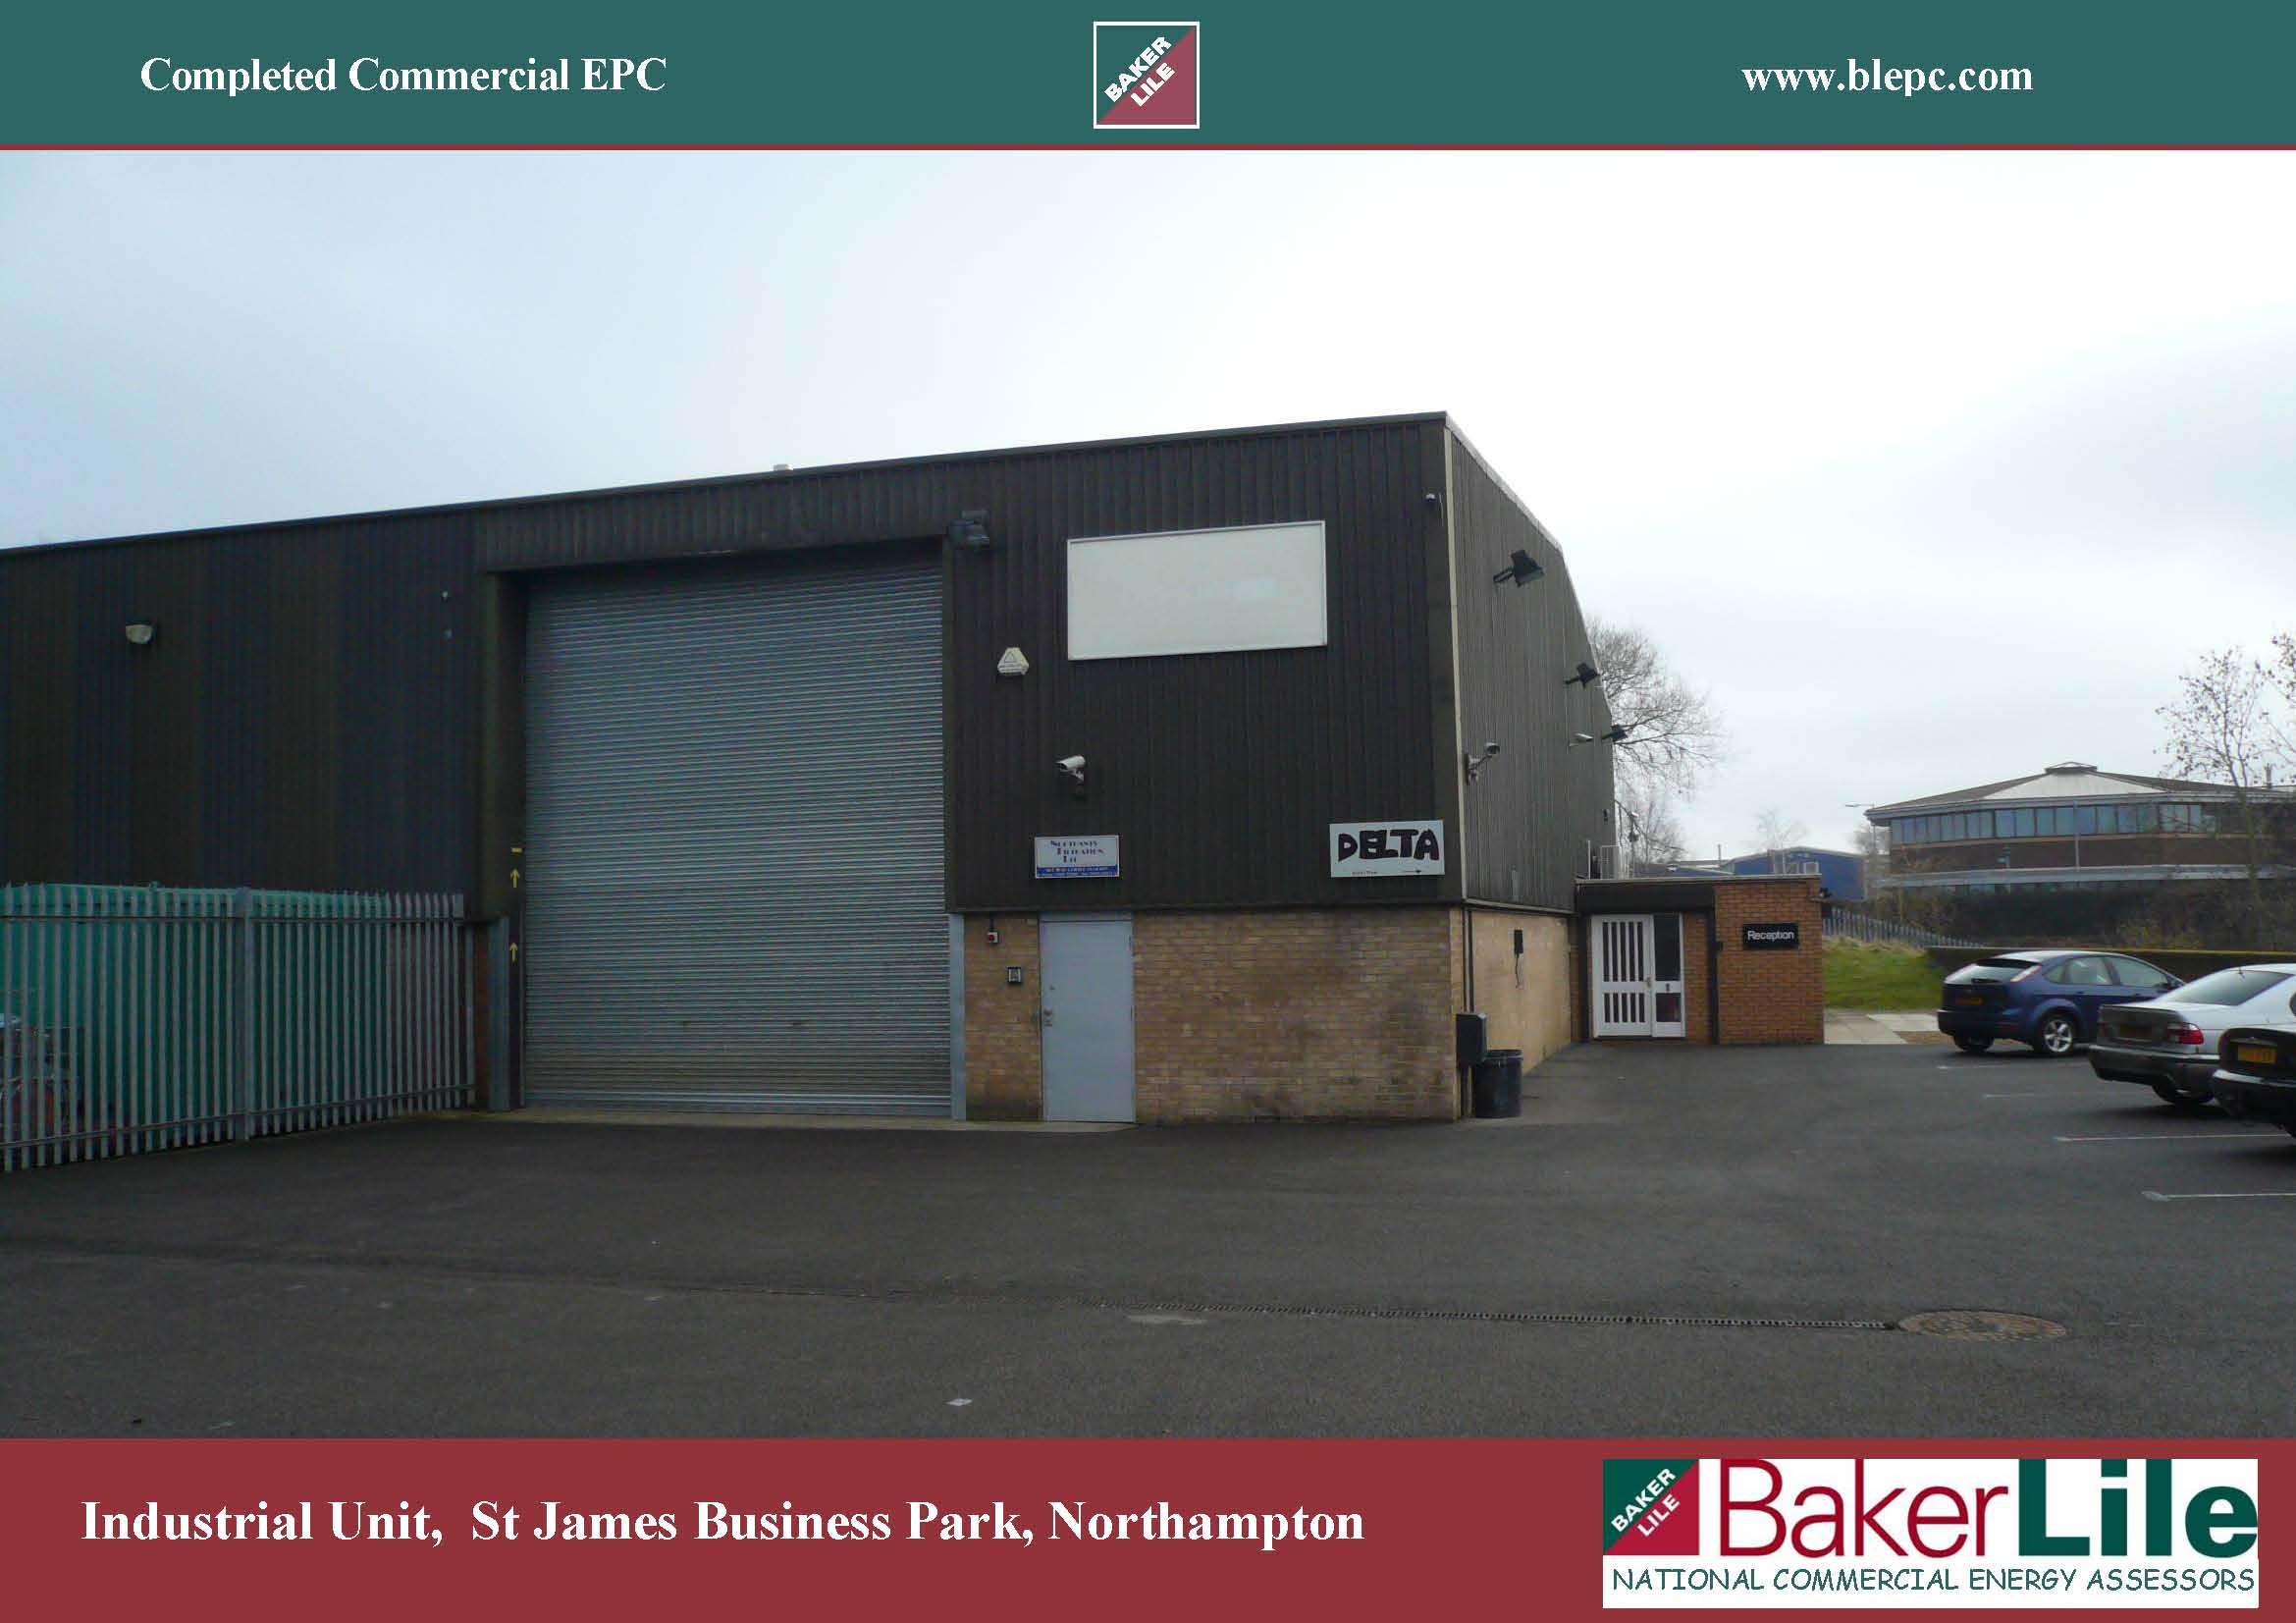 Commercial EPC For an Industrial Unit on St James Business Park, Northampton